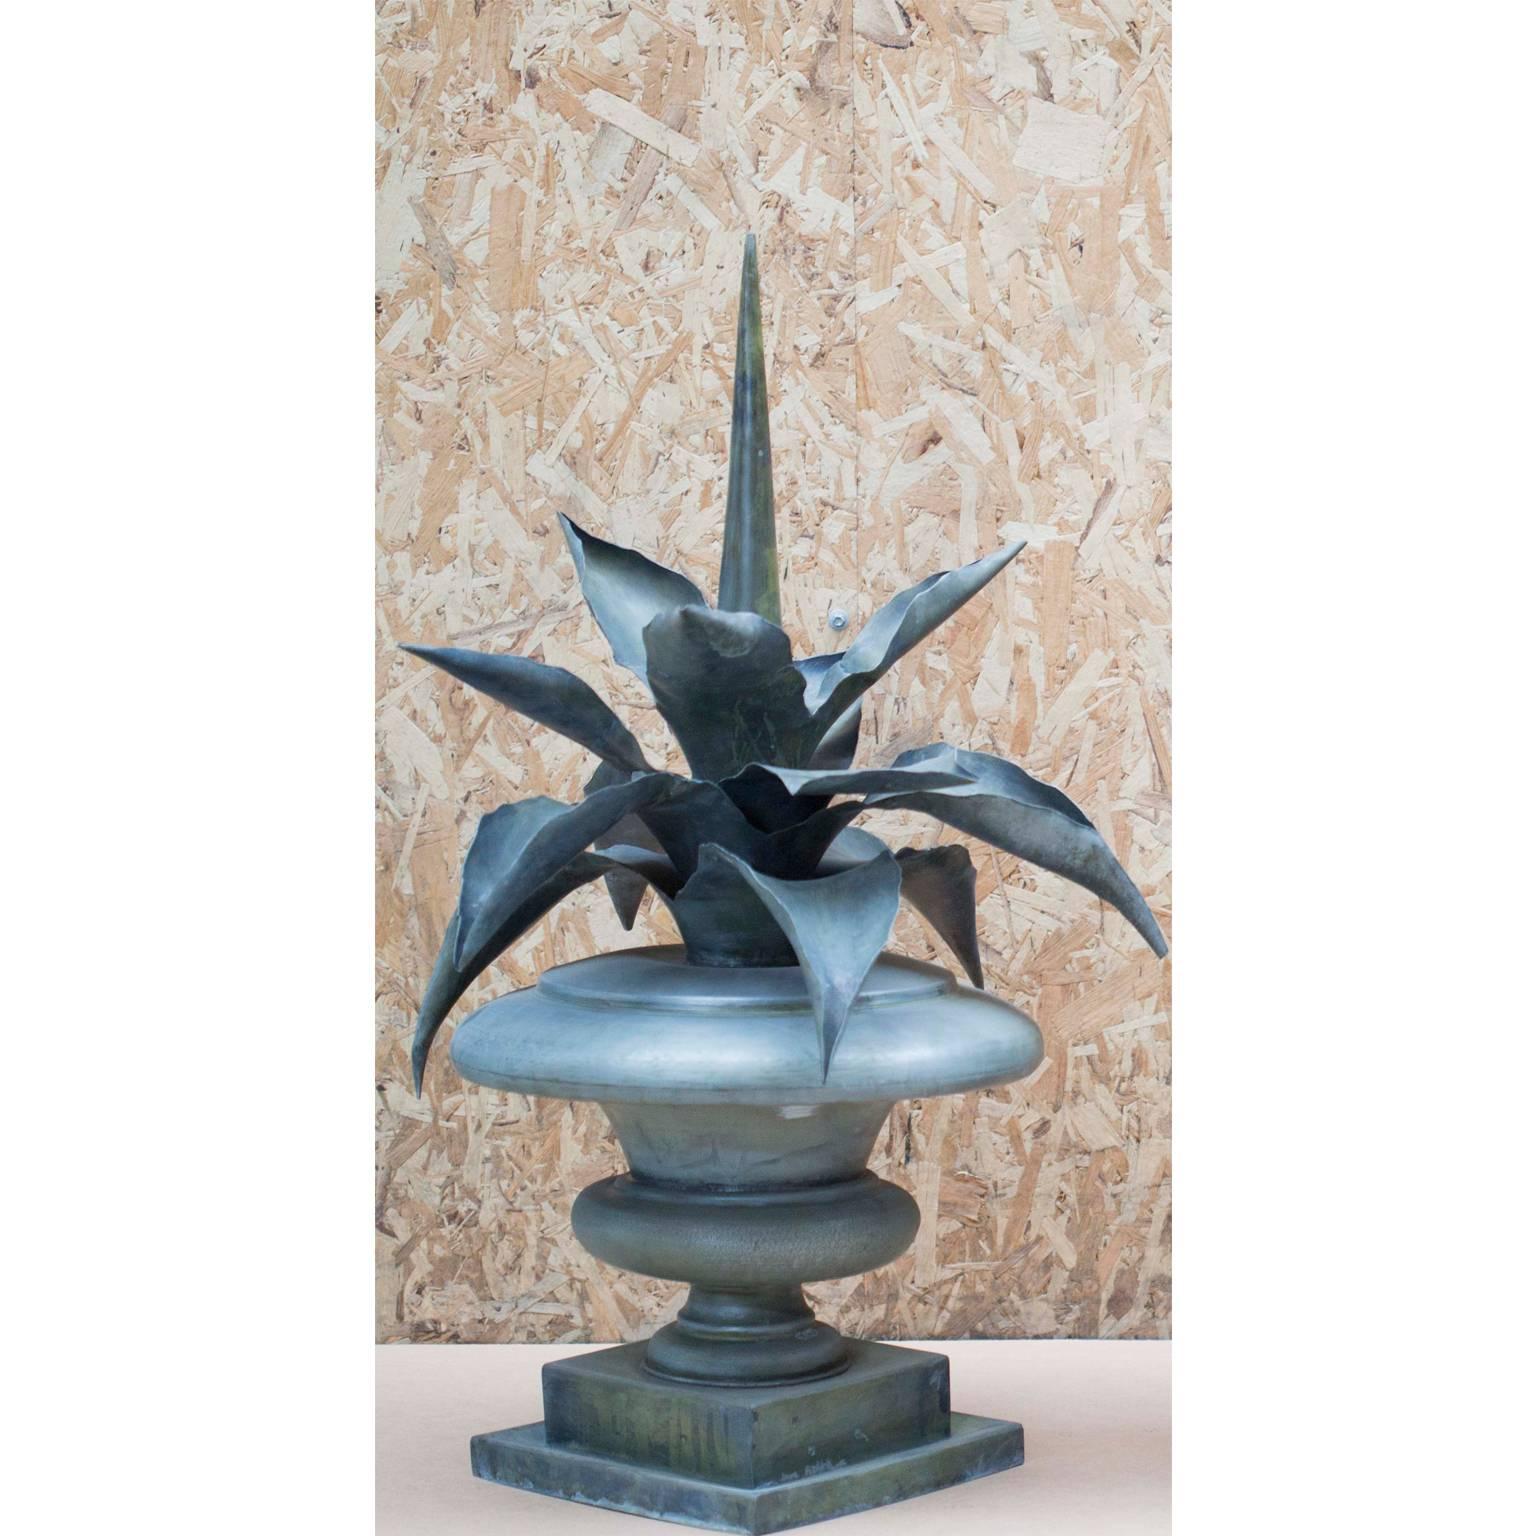 Pair of zinc agave mounted into urns. Fine 20th century artistic metal works with a heavy lip on the square double bases. Typical flower ornament, mostly used in the architecture of the 18th century as finials on pilasters throughout France and